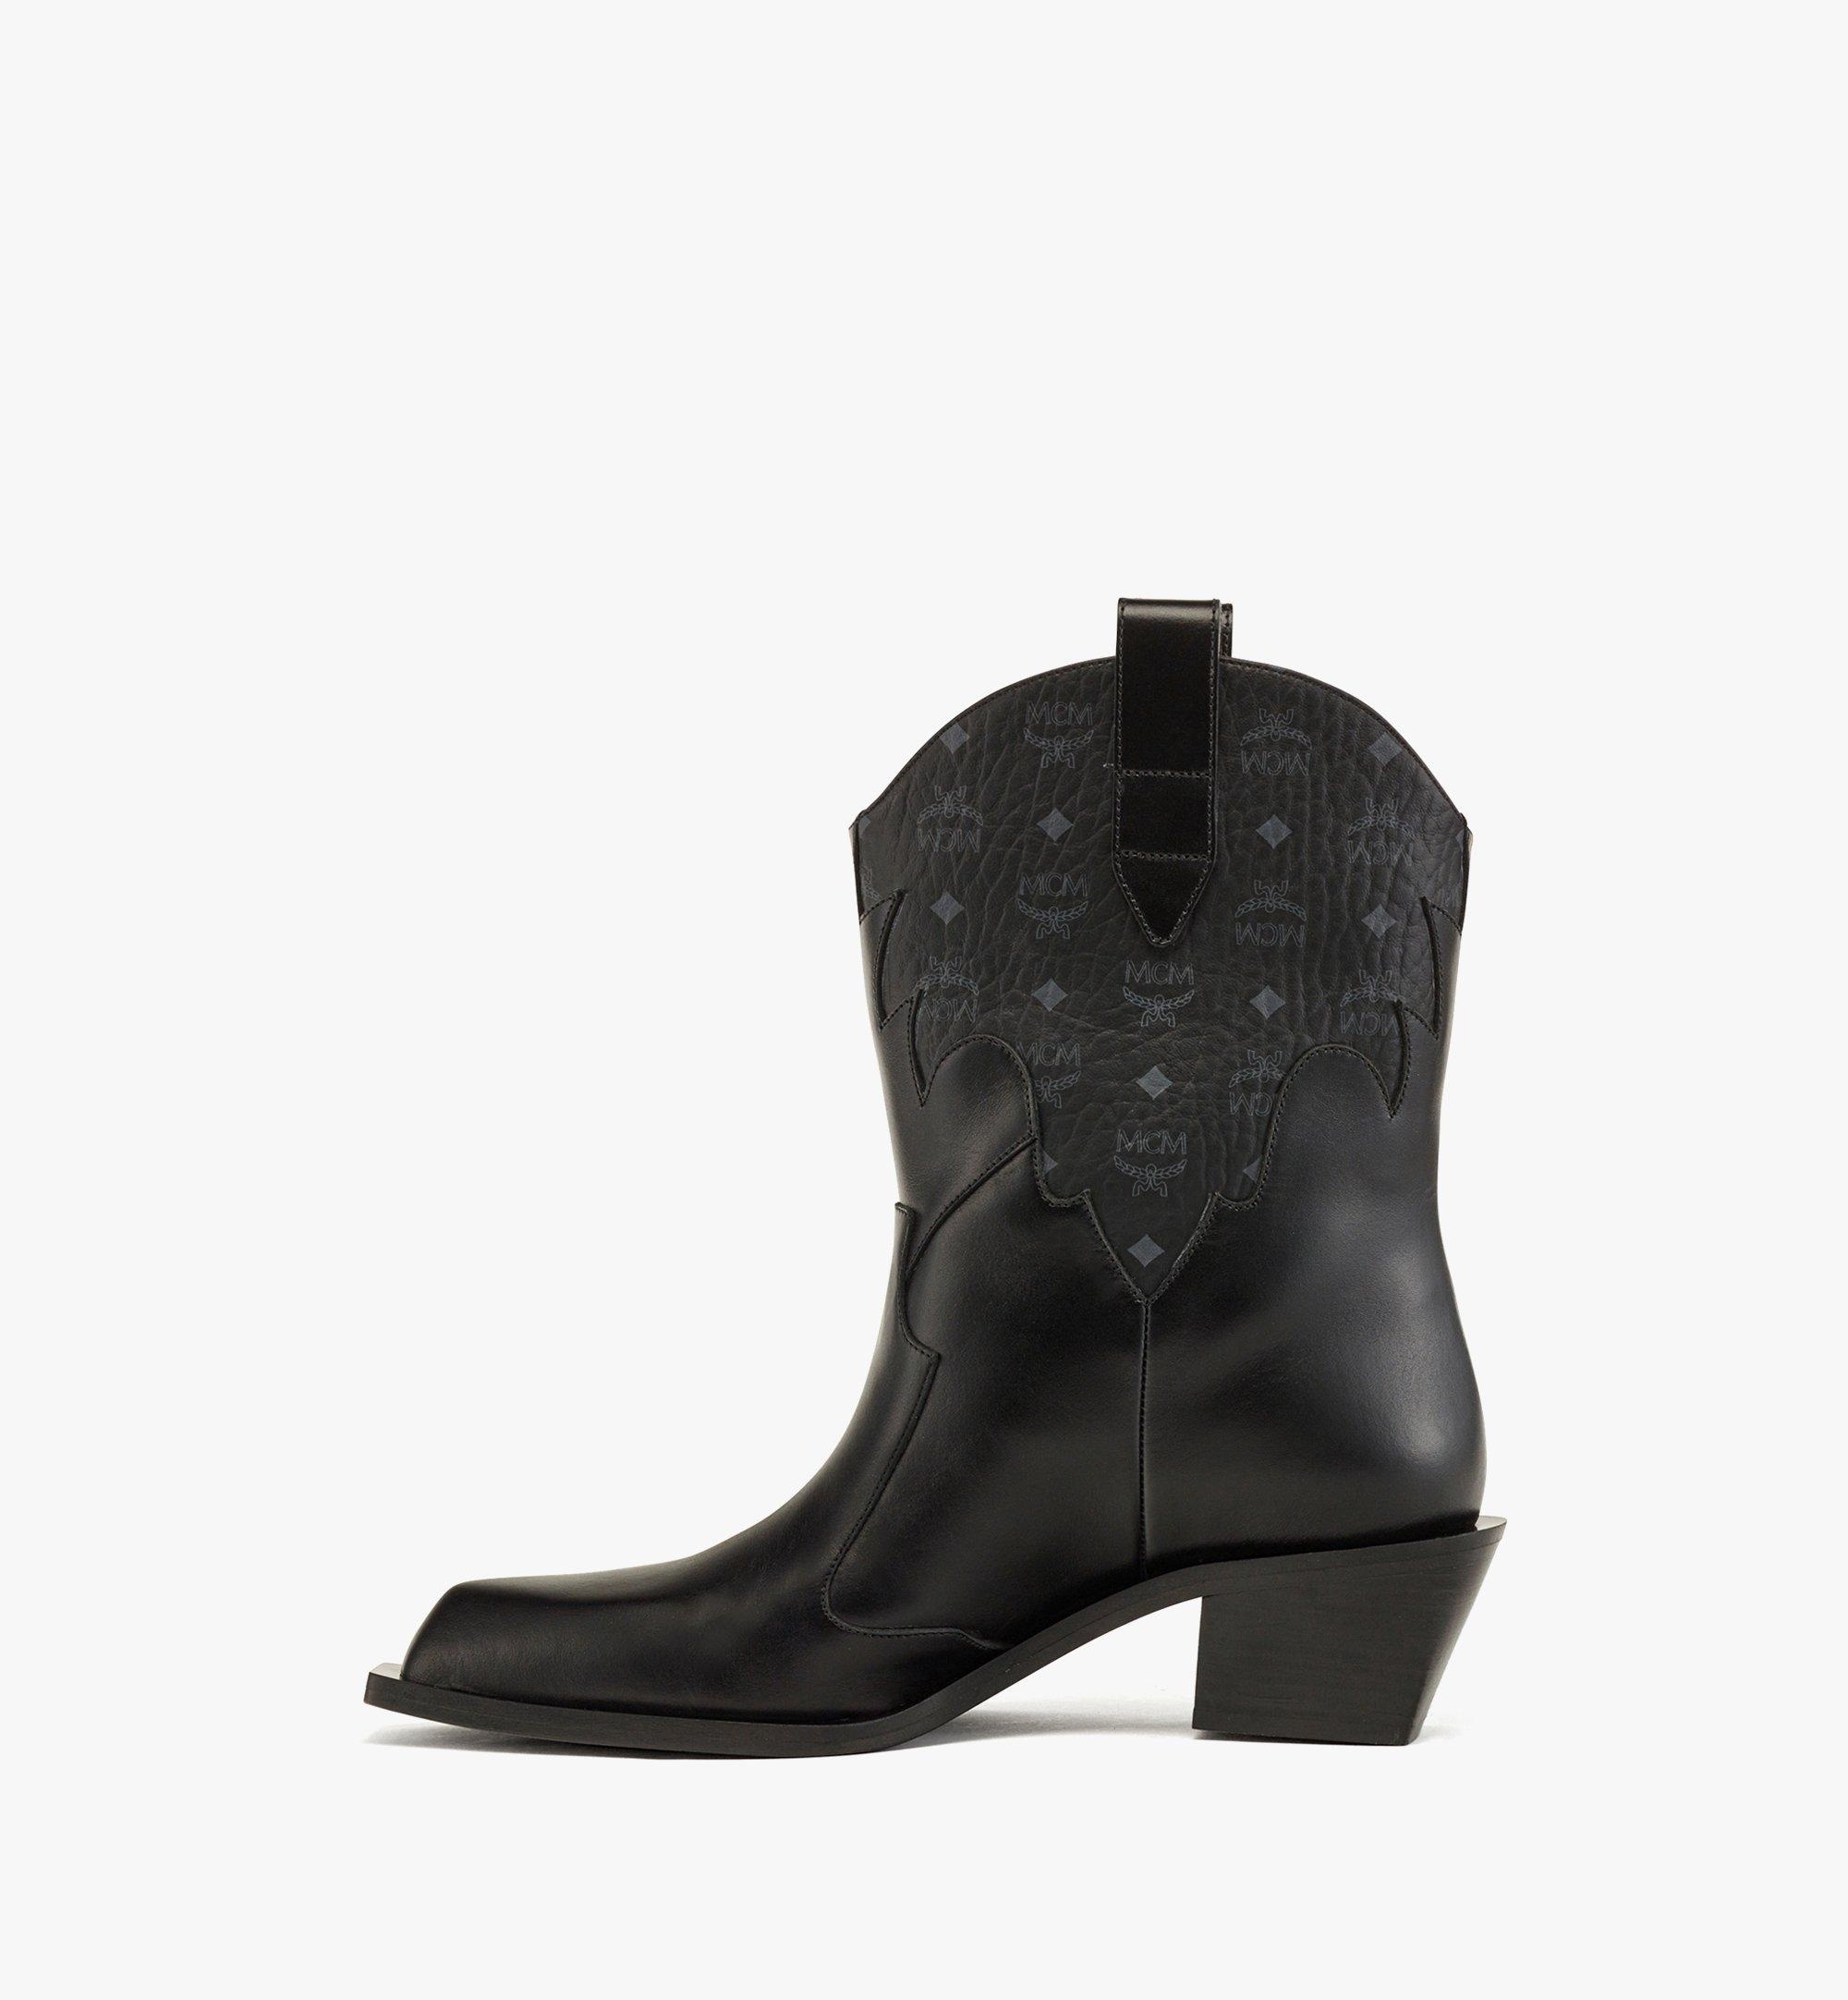 Cyber Cowboy Boots in Visetos Leather Mix - 2